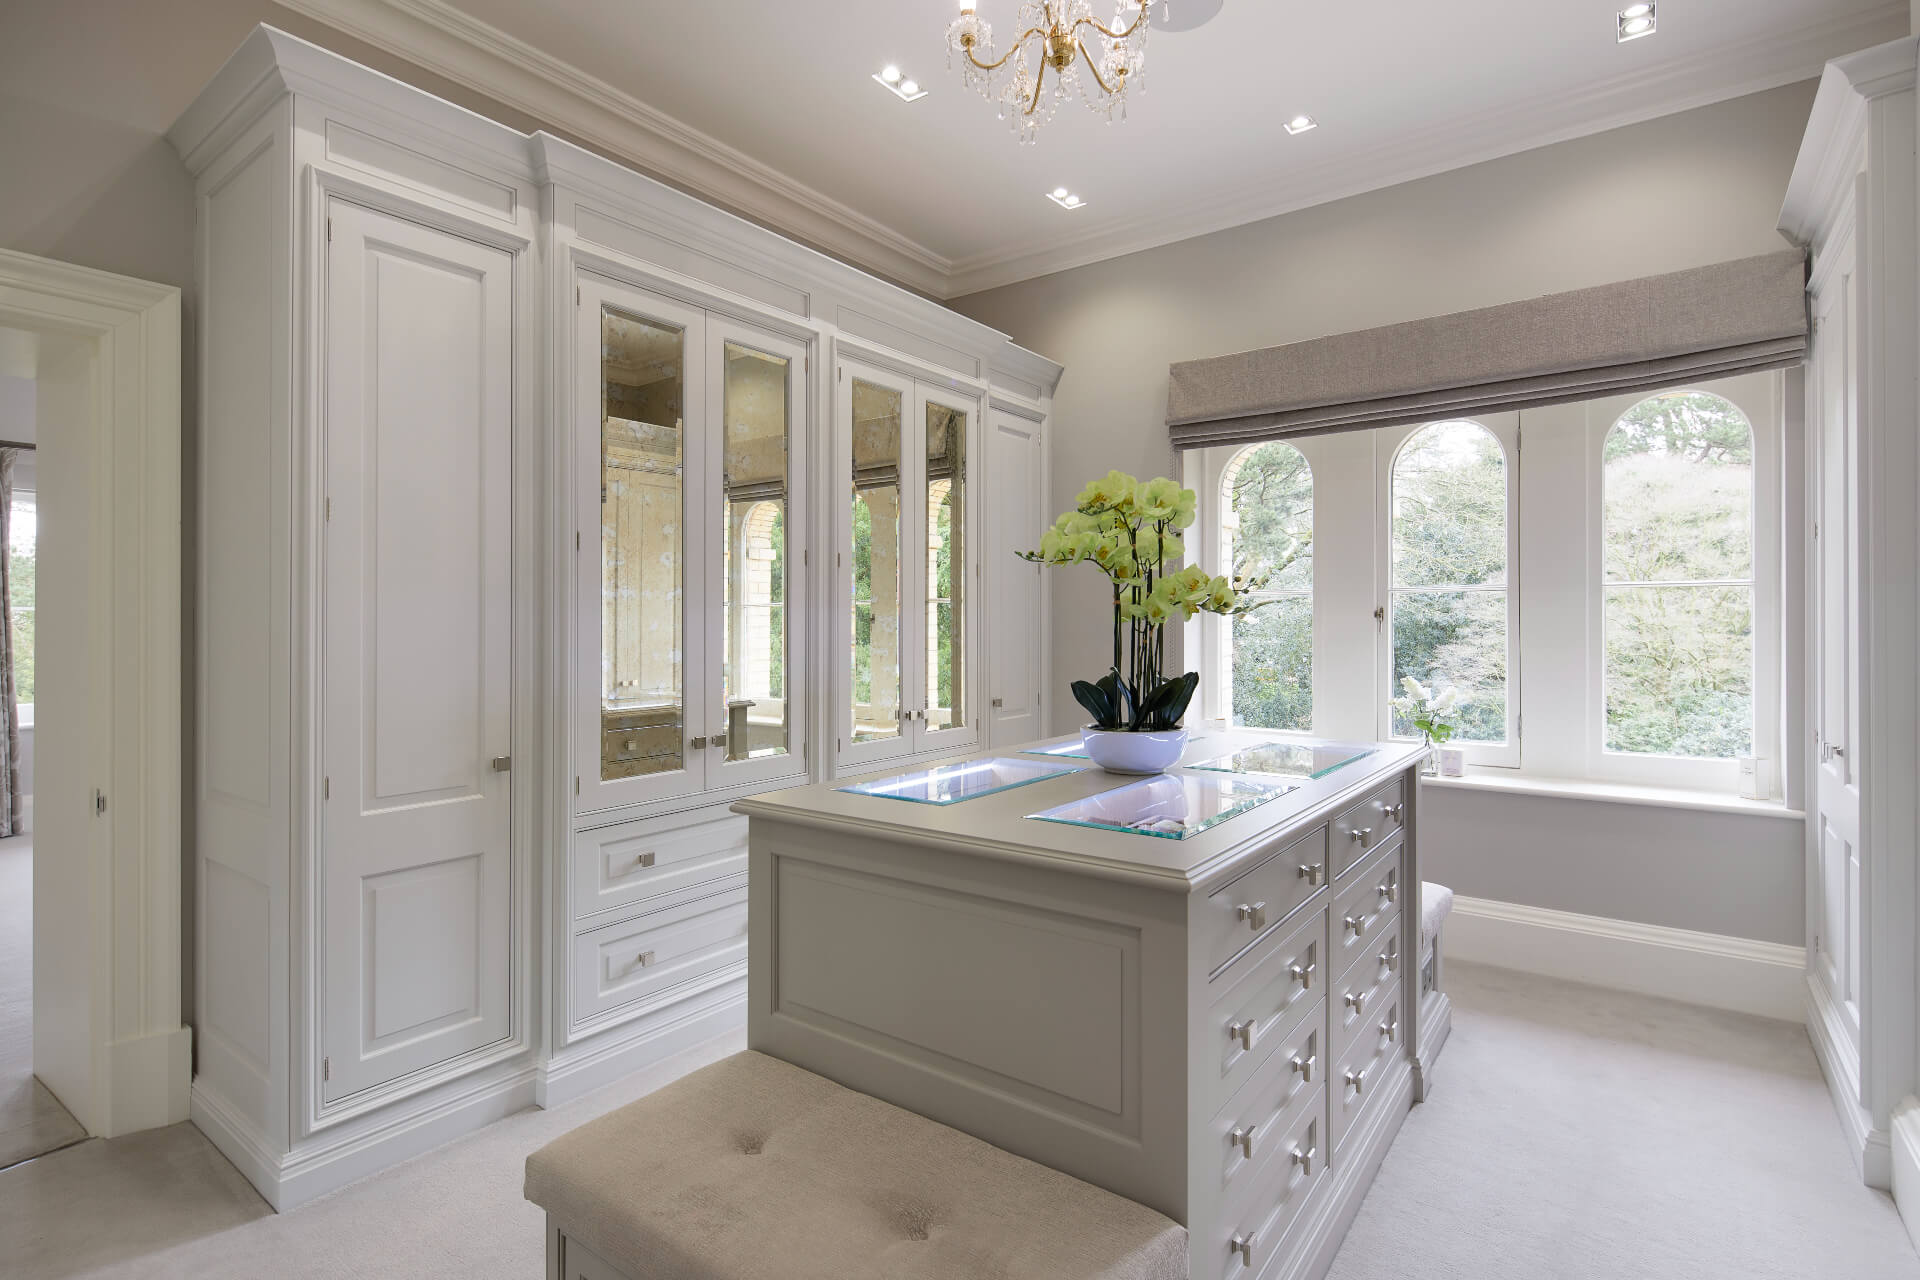 A White painted dressing room by Hetherington Newman with wardrobes and a central storage unit